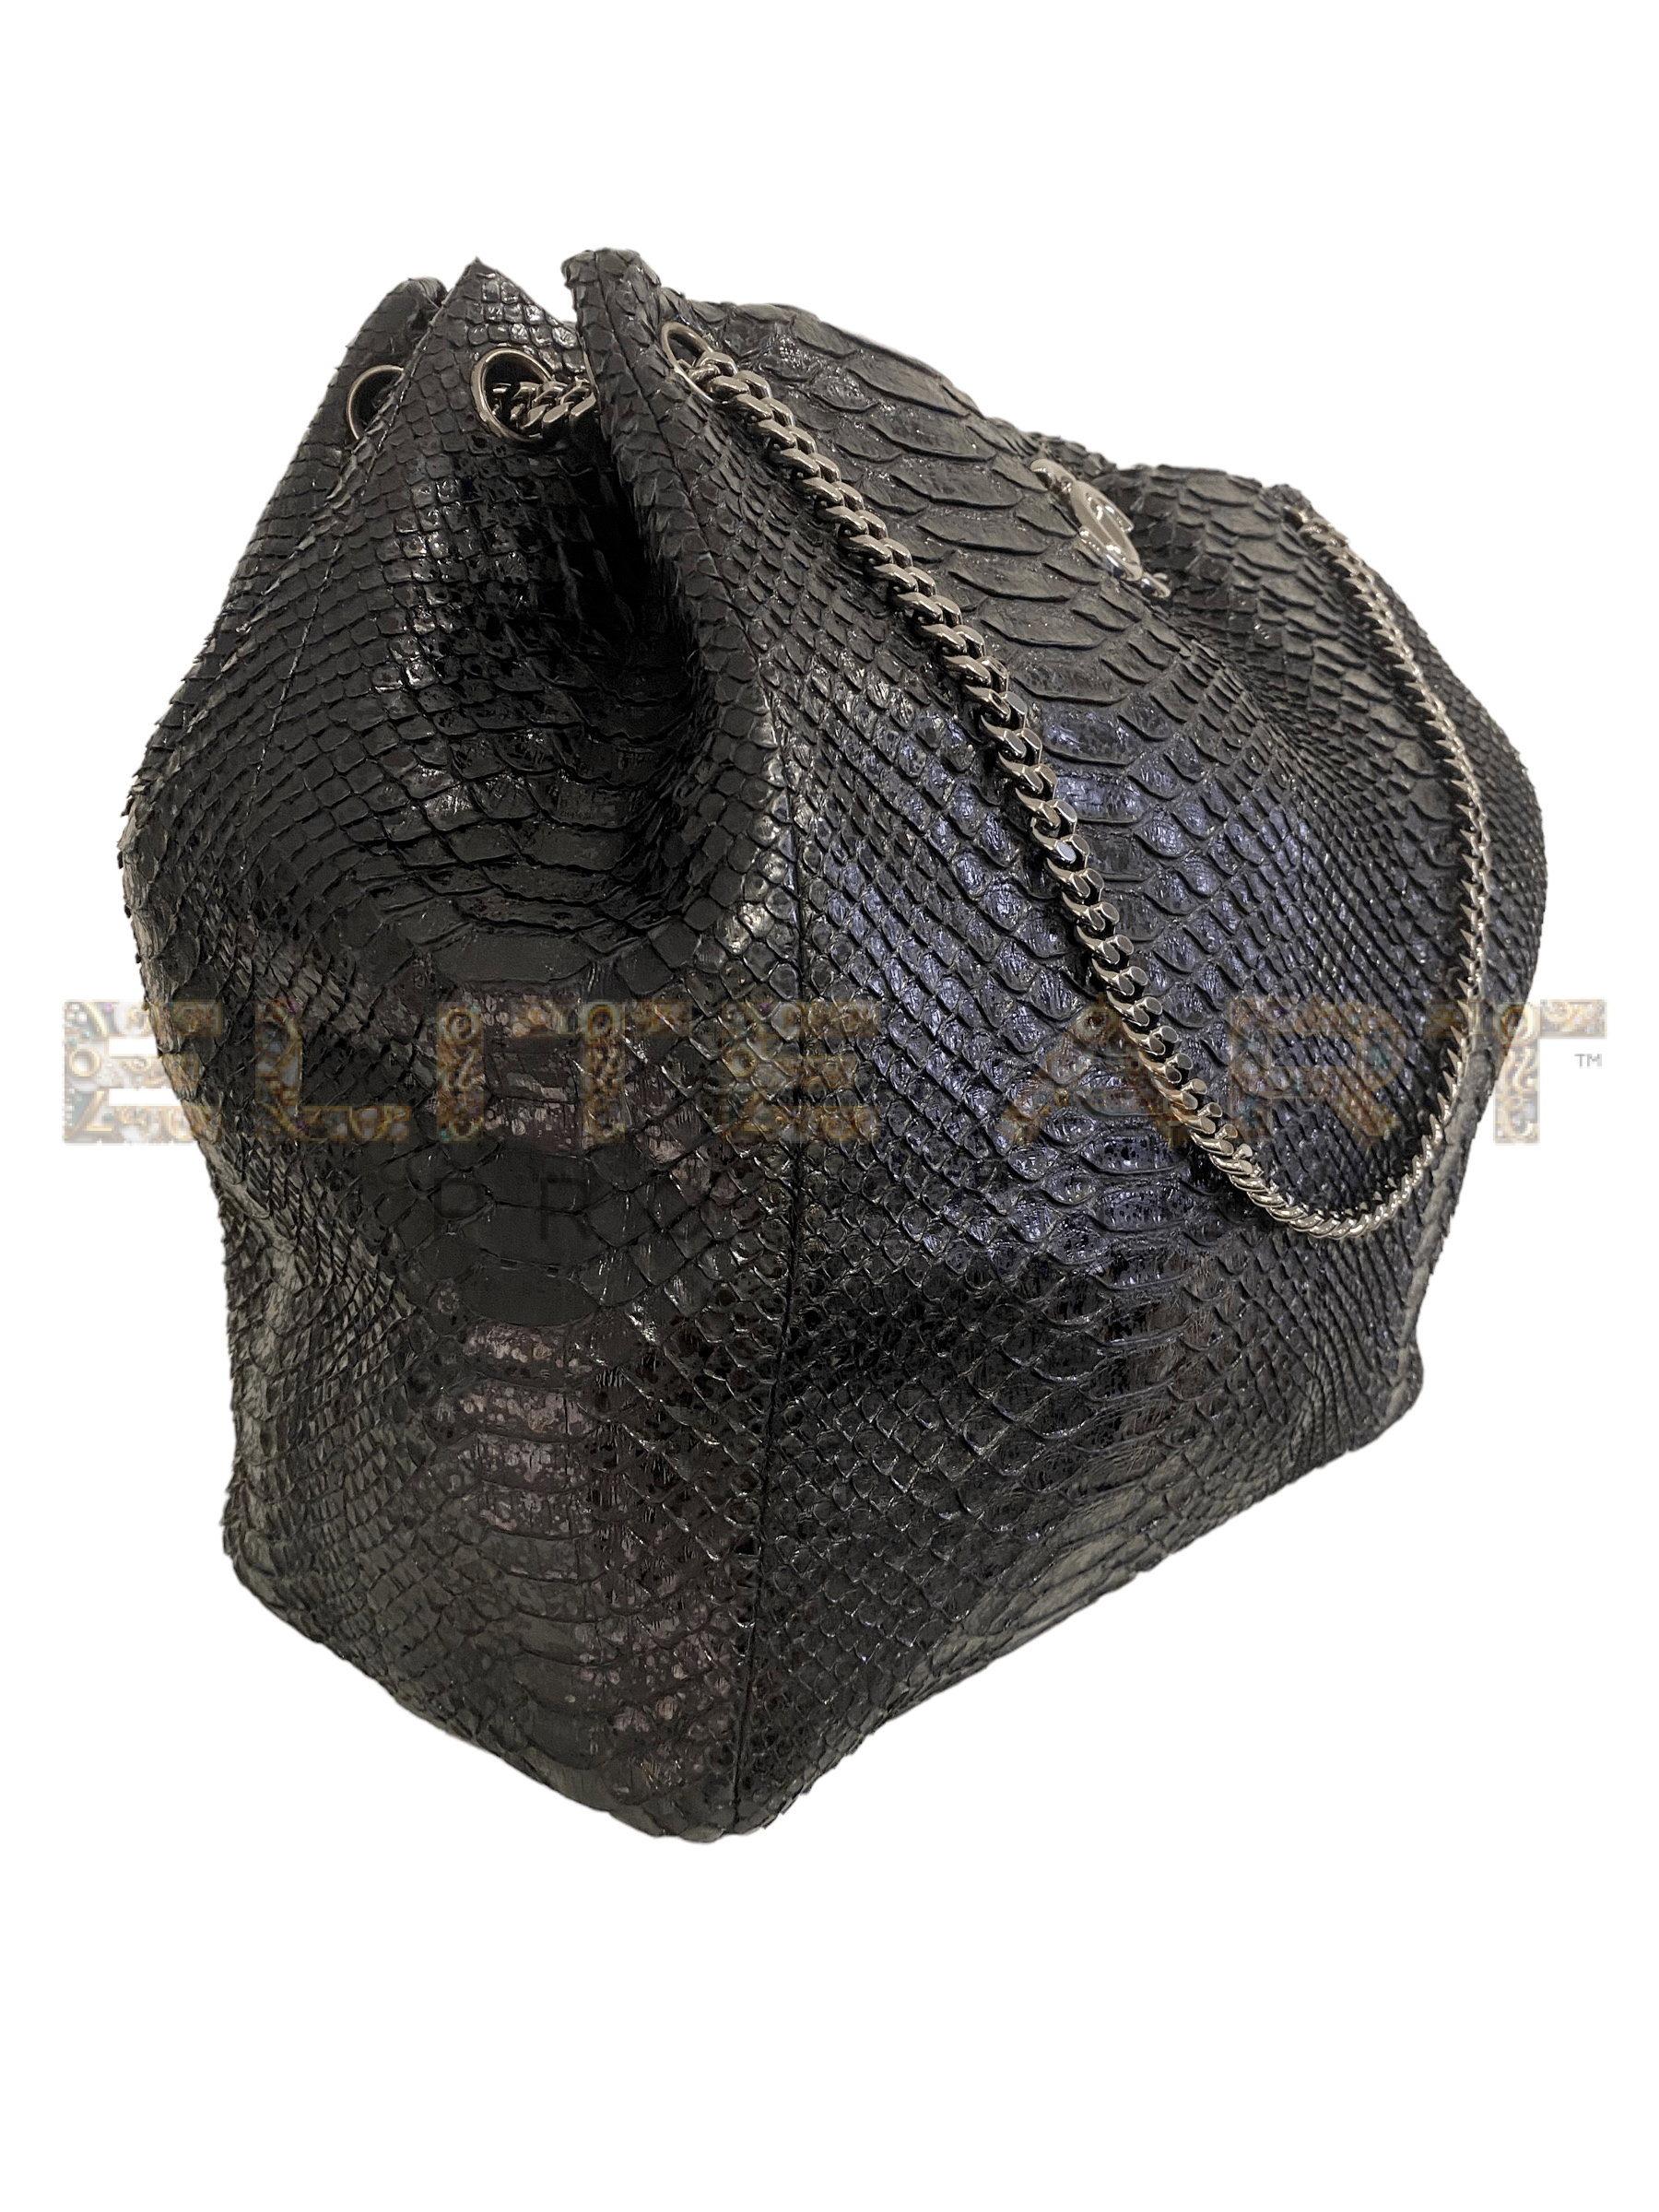 ELS Fashion TV, Elite Art Projects, Chanel, tote bag, black python leather, silver-tone hardware, magnetic button closure, gray fabric lining, spacious, sliding chain strap, hand carry, shoulder carry, internal pocket, zip closure, hook, 2008/09, excellent condition